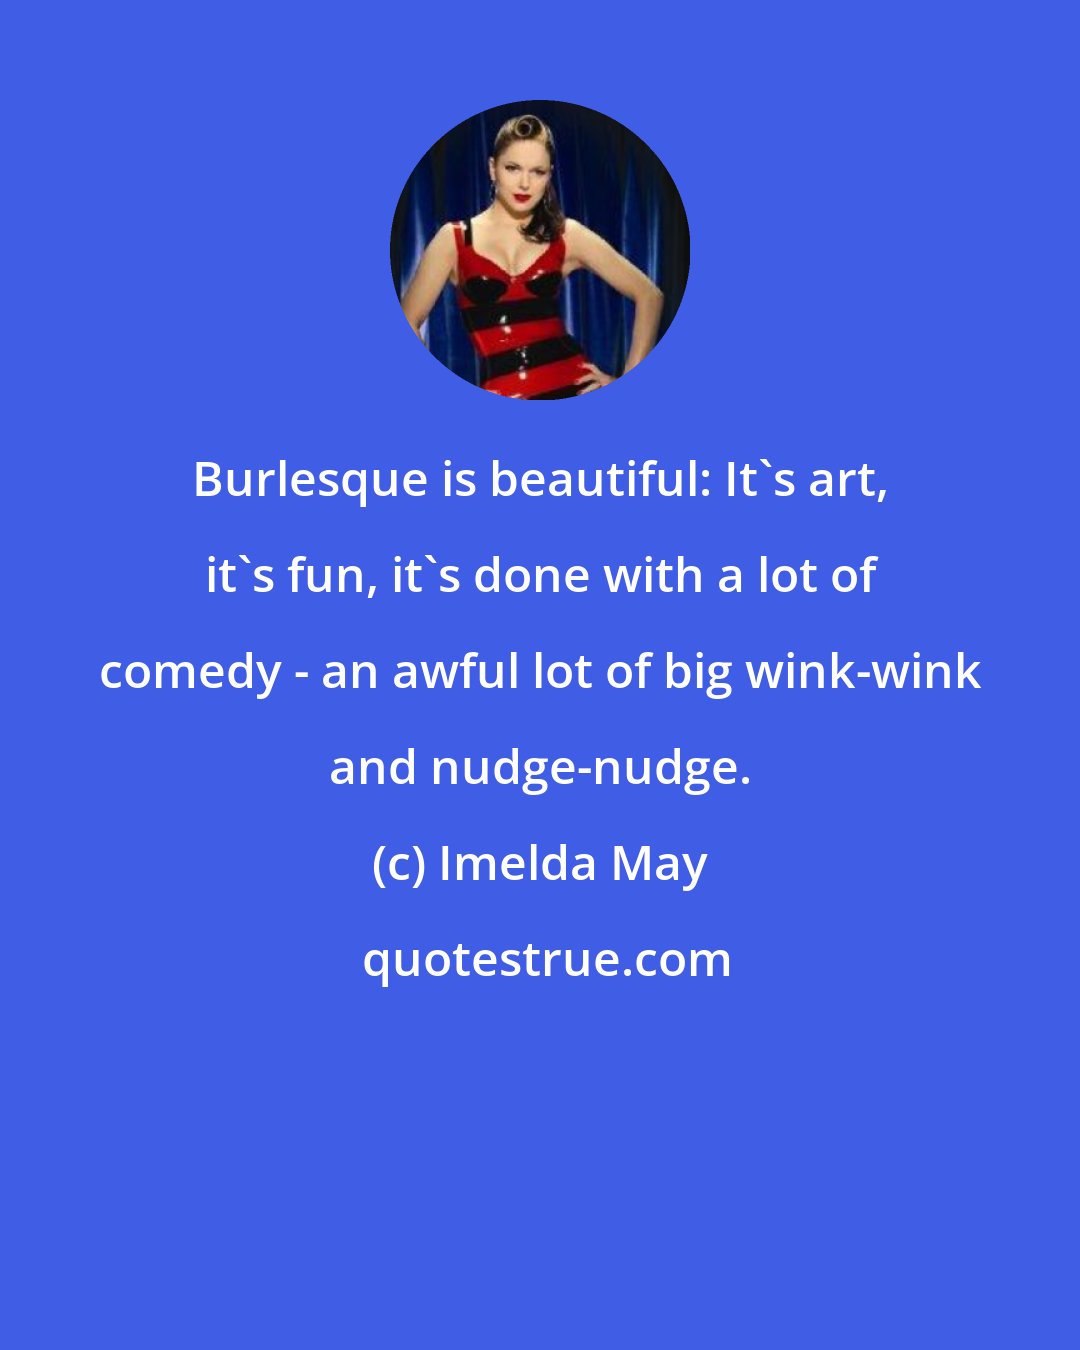 Imelda May: Burlesque is beautiful: It's art, it's fun, it's done with a lot of comedy - an awful lot of big wink-wink and nudge-nudge.